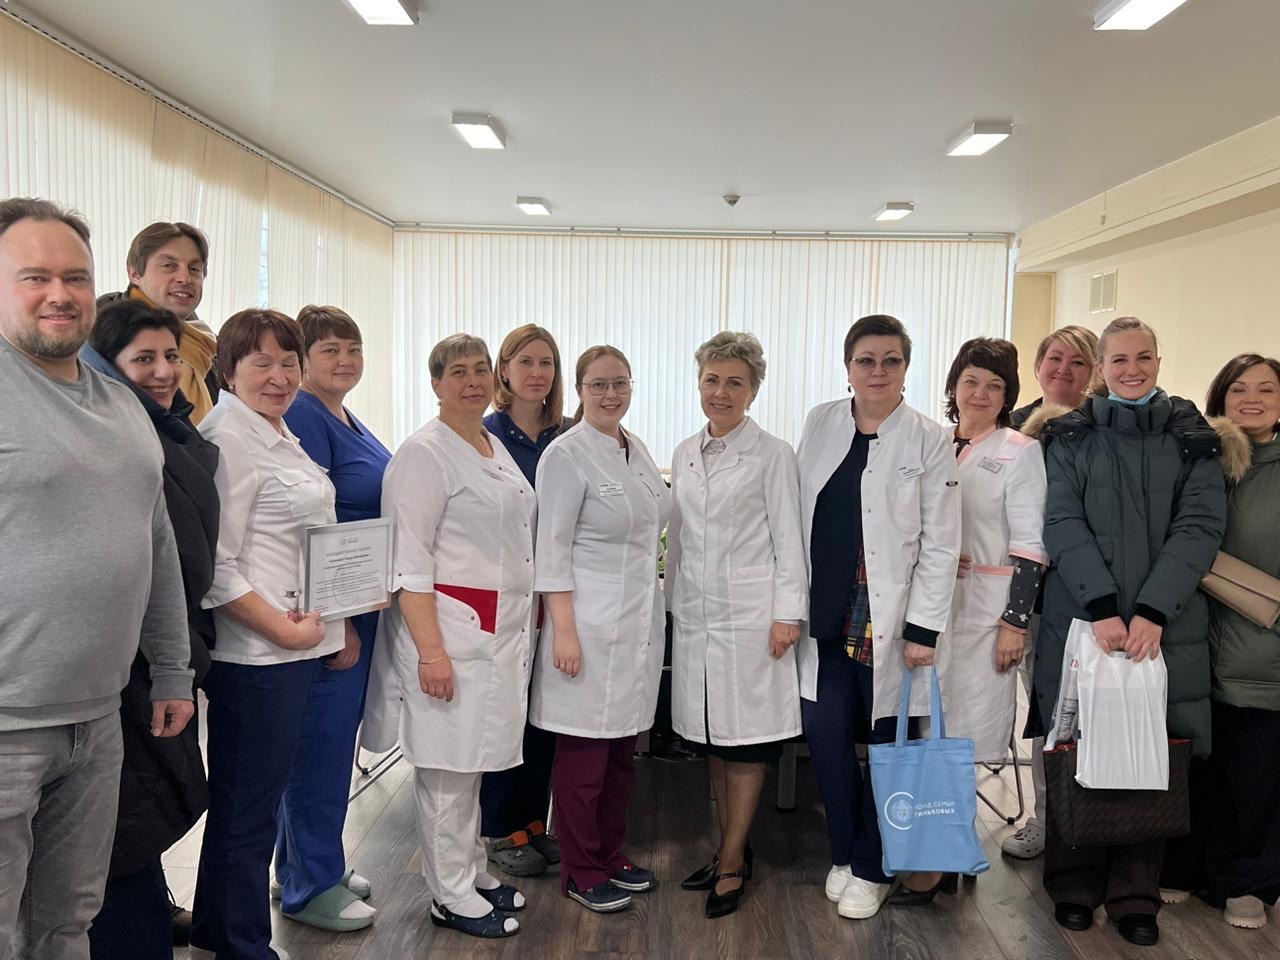 A team from the Tinkov Family Foundation visited the regional hospital